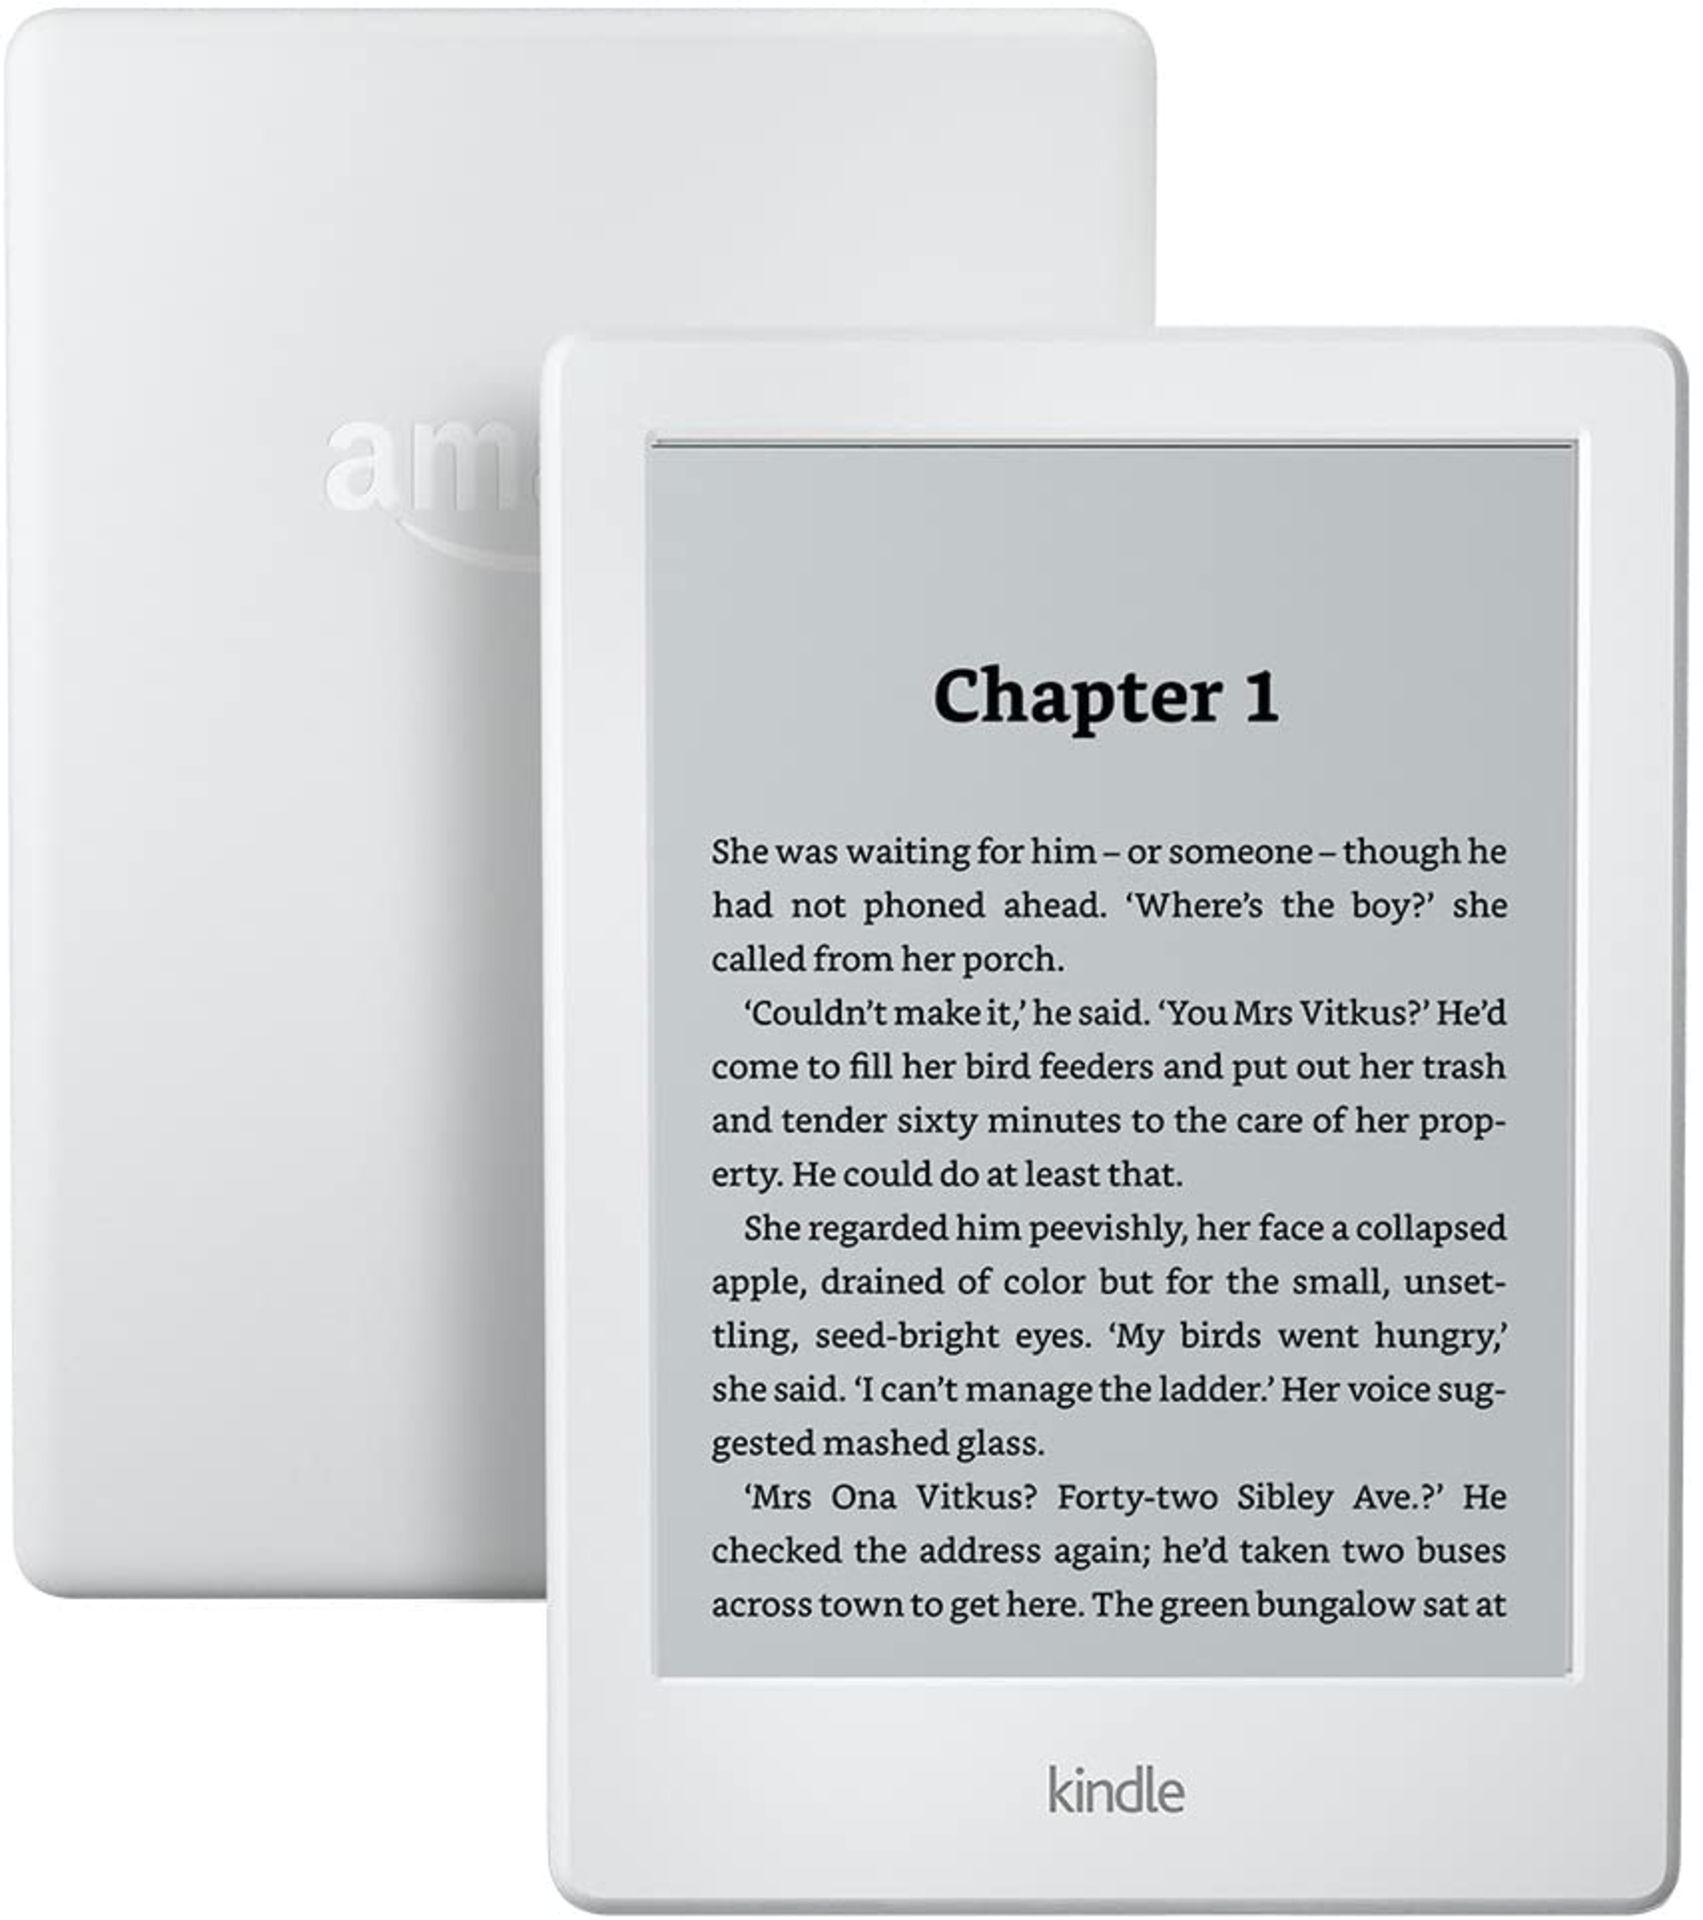 Kindle | 6" Display (without built-in light),